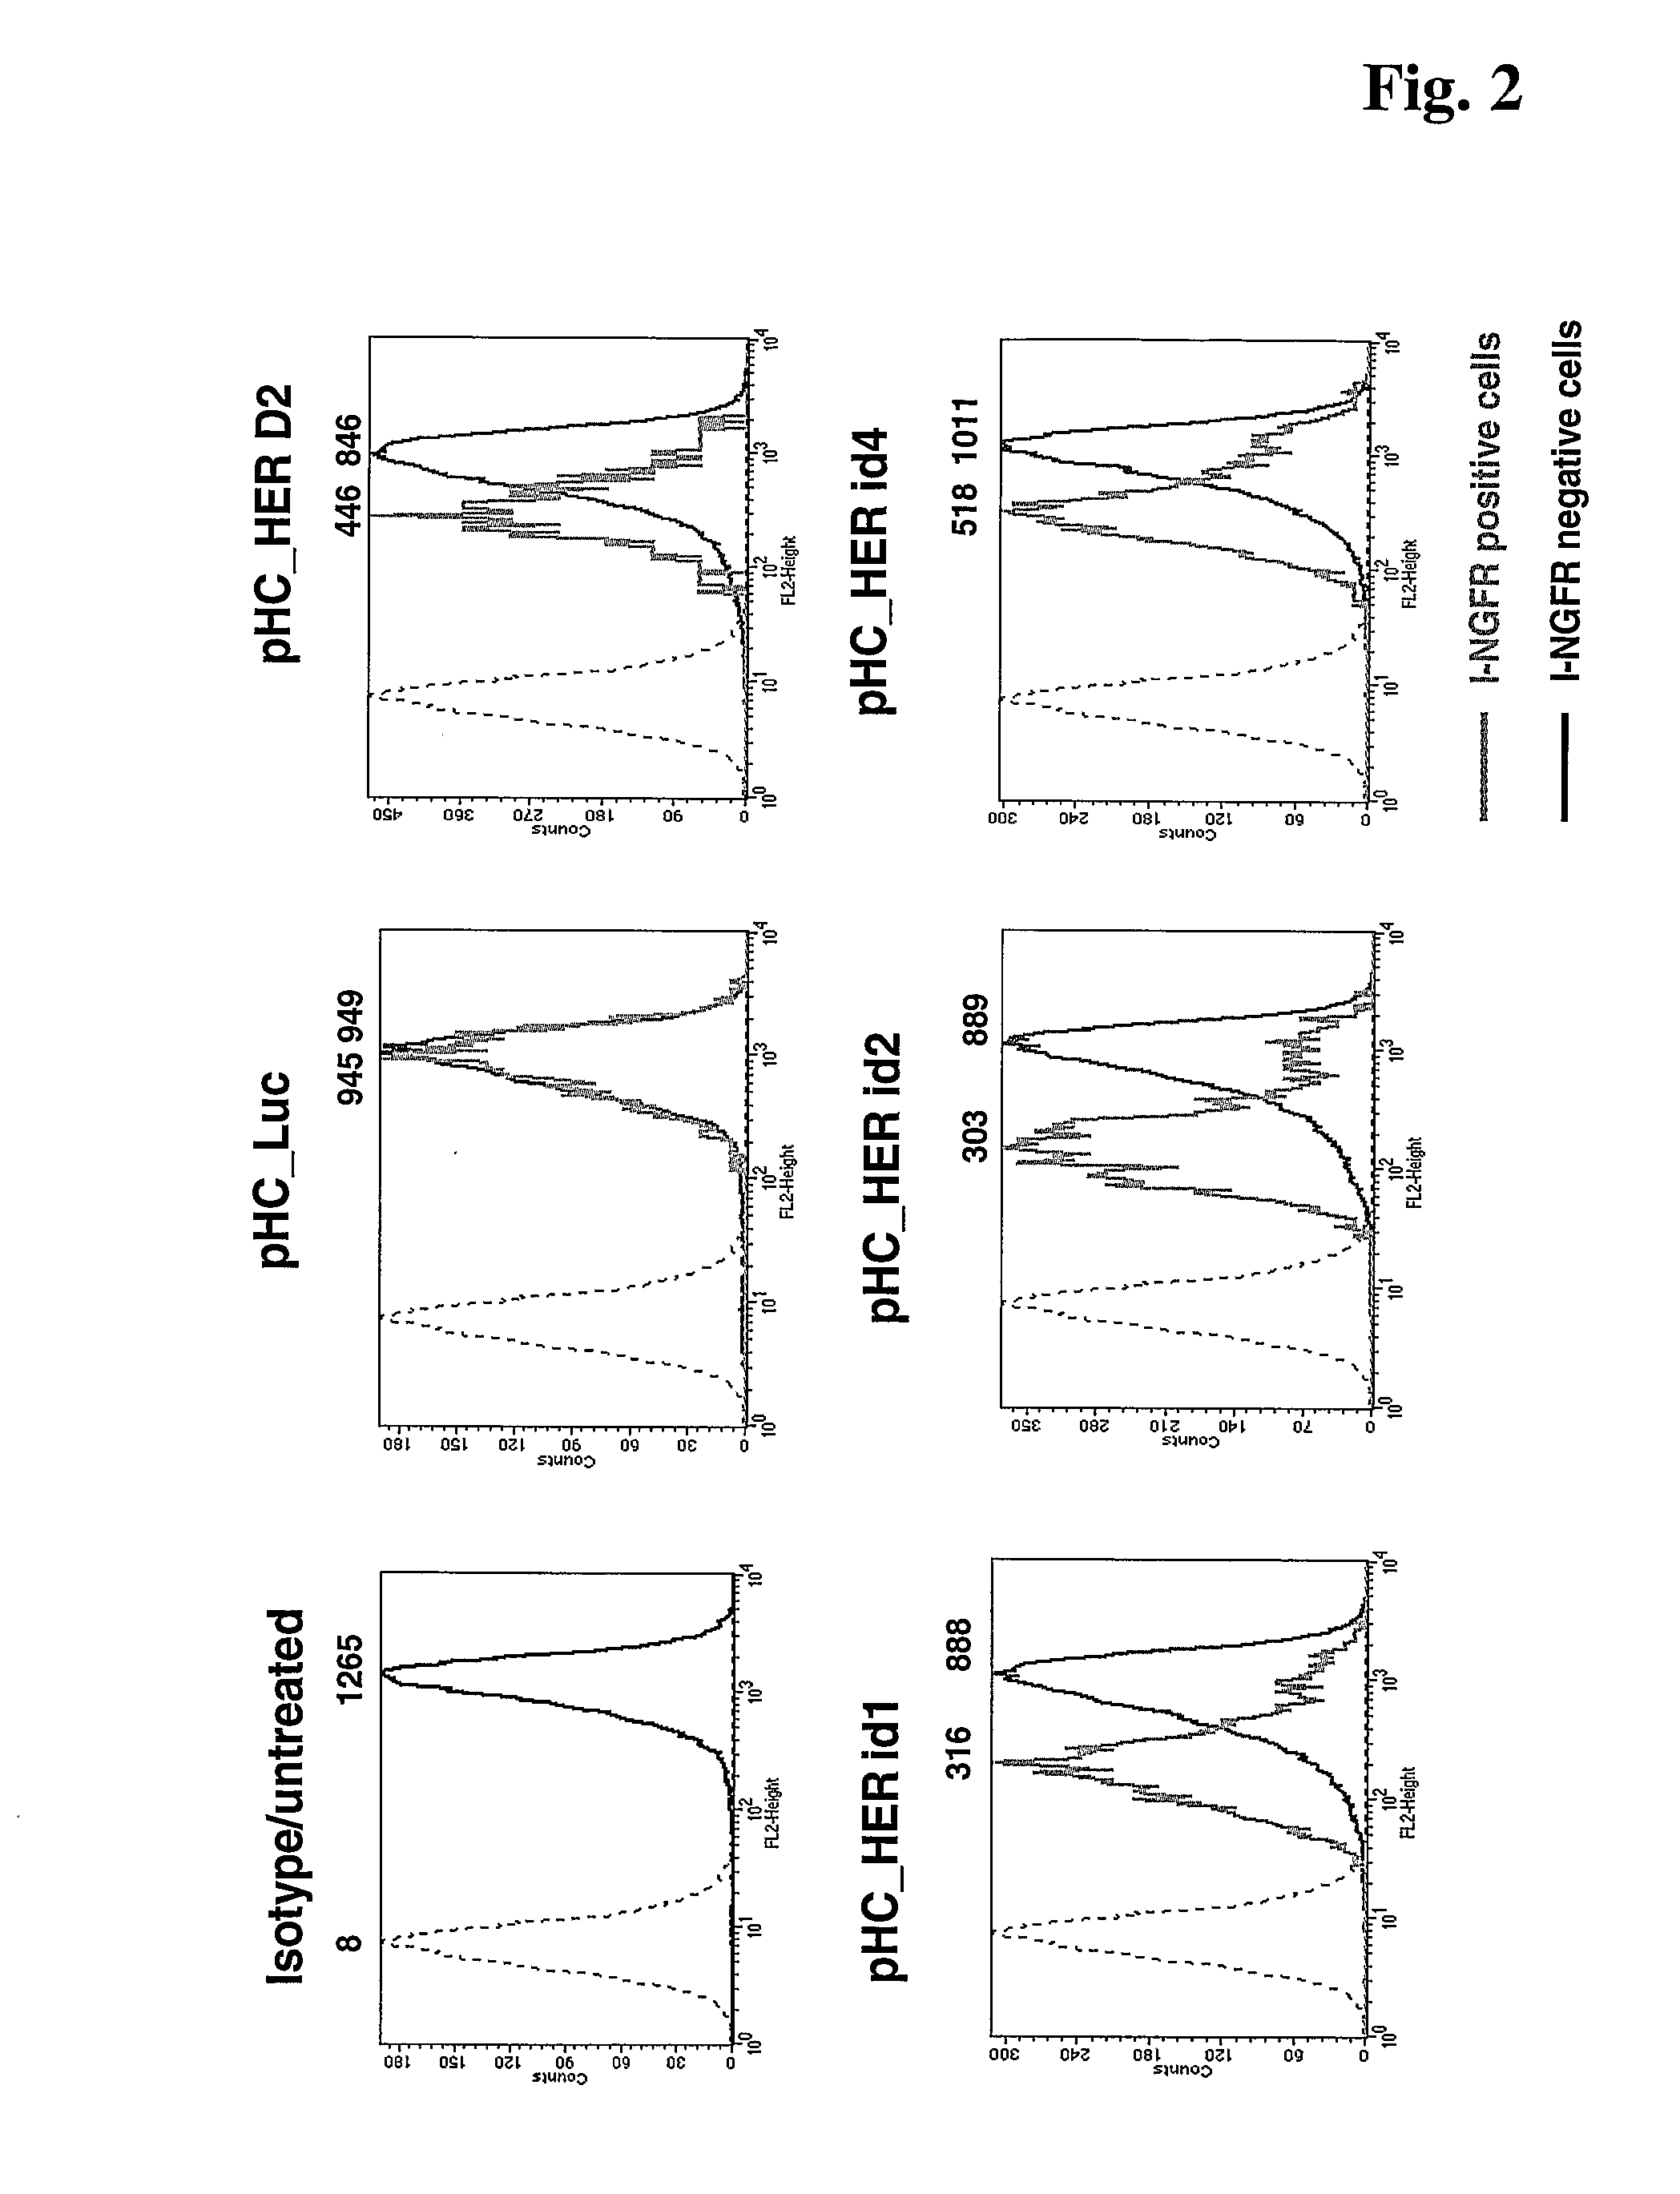 Method for Improved Selection of Rnai Transfectants